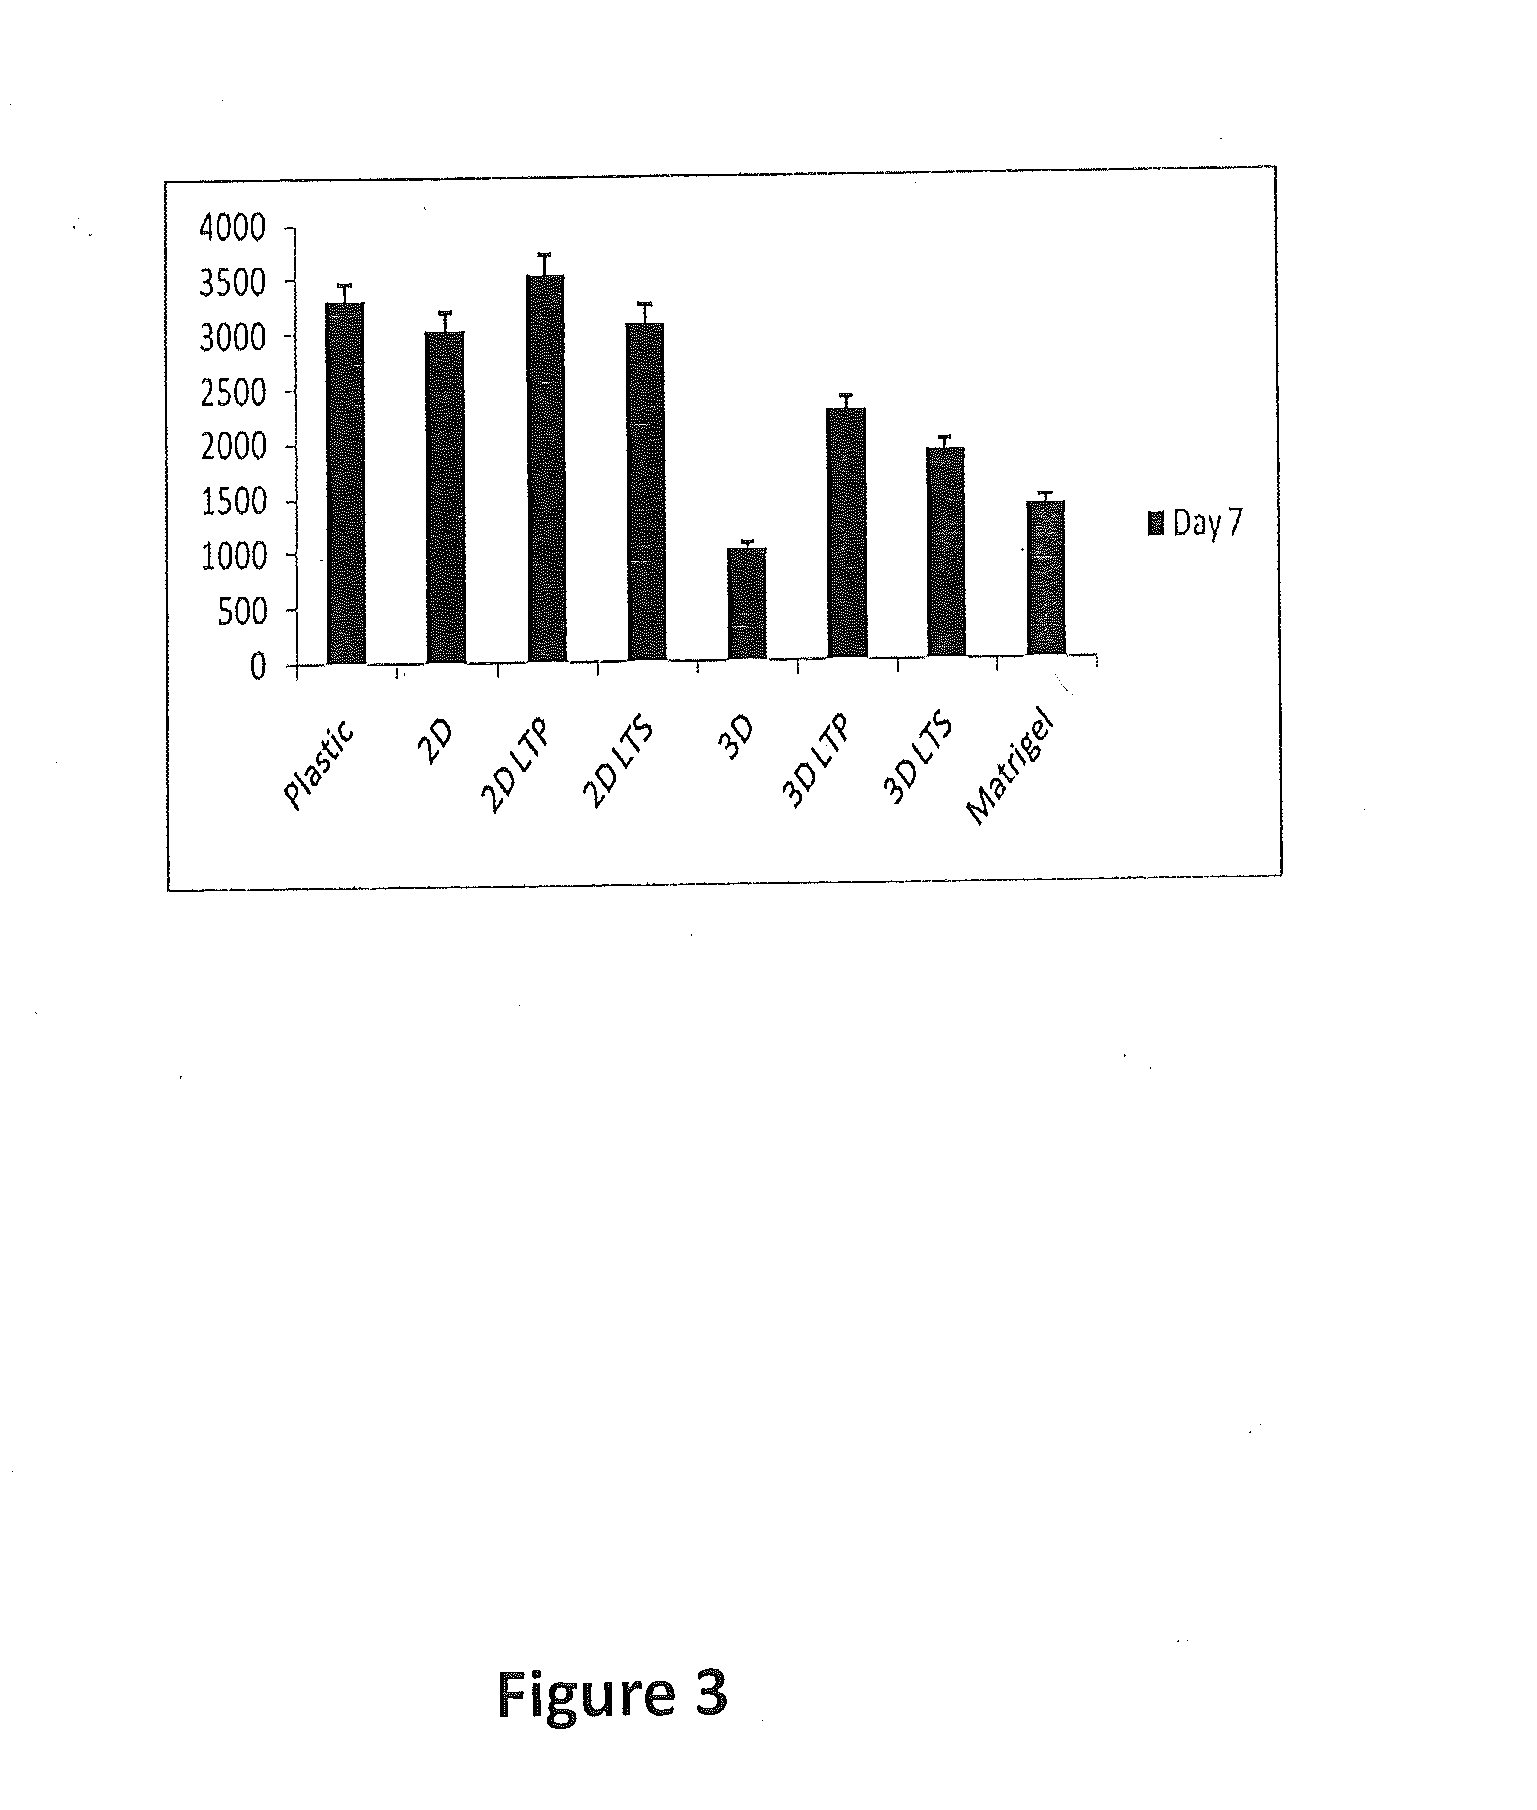 Tissue-Specific Extracellular Matrix With or Without Tissue Protein Components for Cell Culture